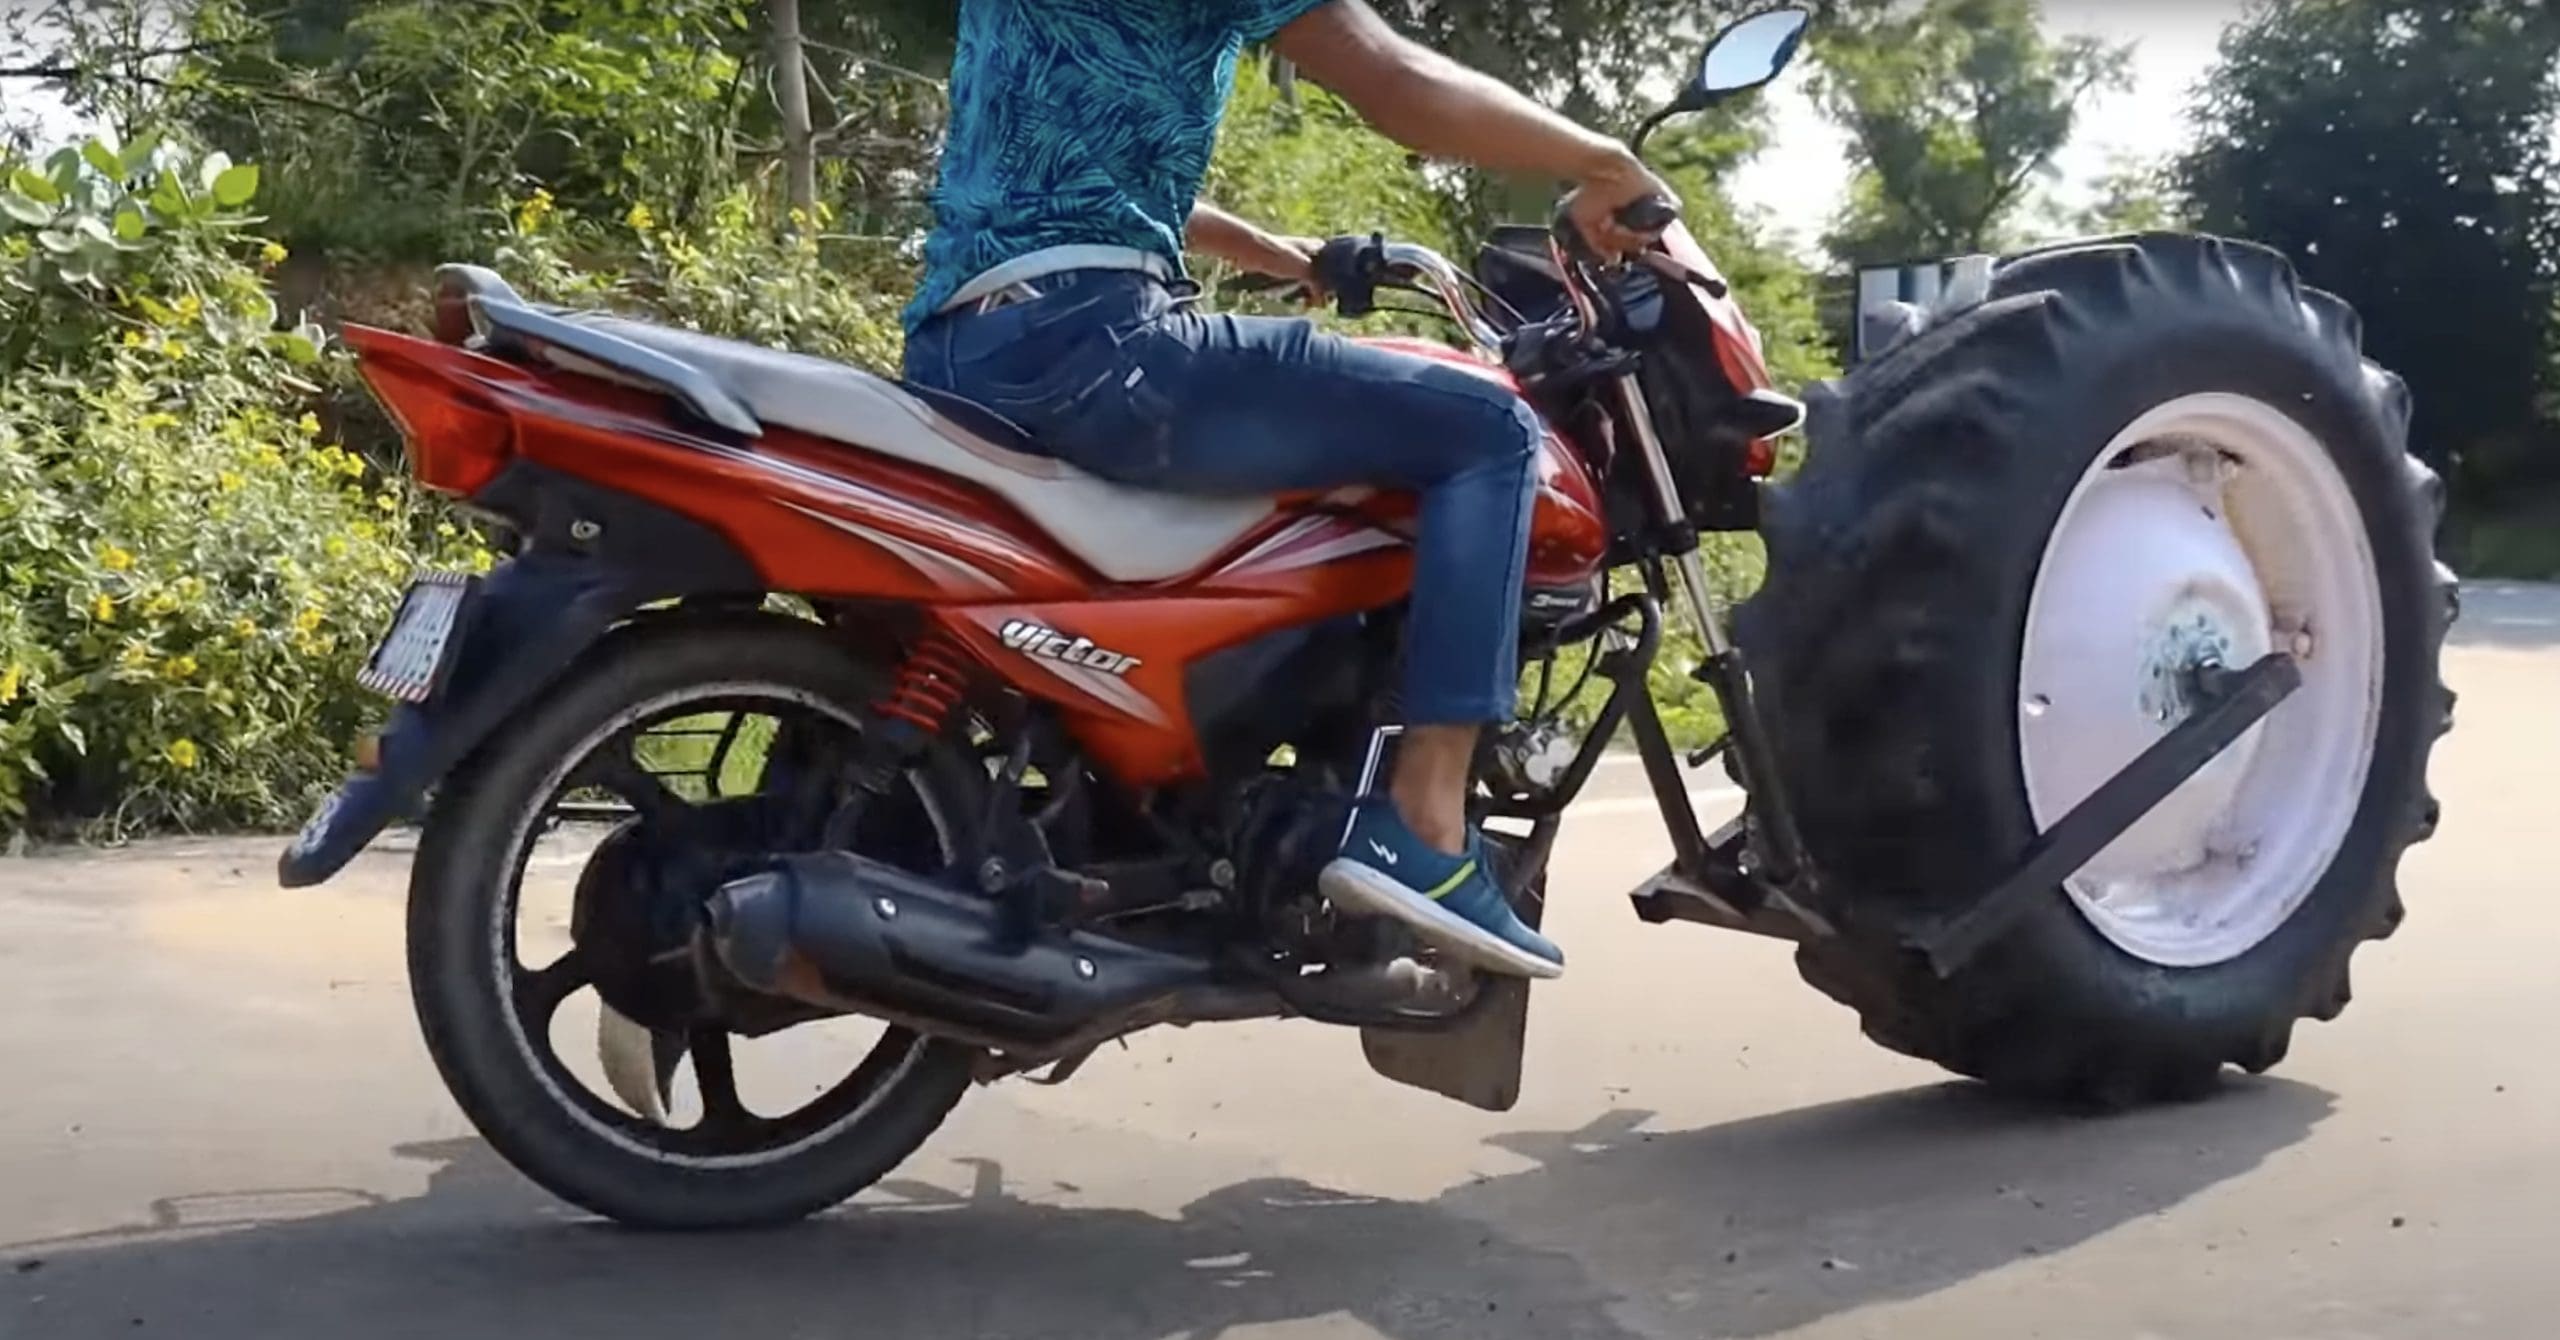 CrazyXYZ's coverage of a TVS Victor with a tractor tire for a front wheel. Media sourced from Youtube.